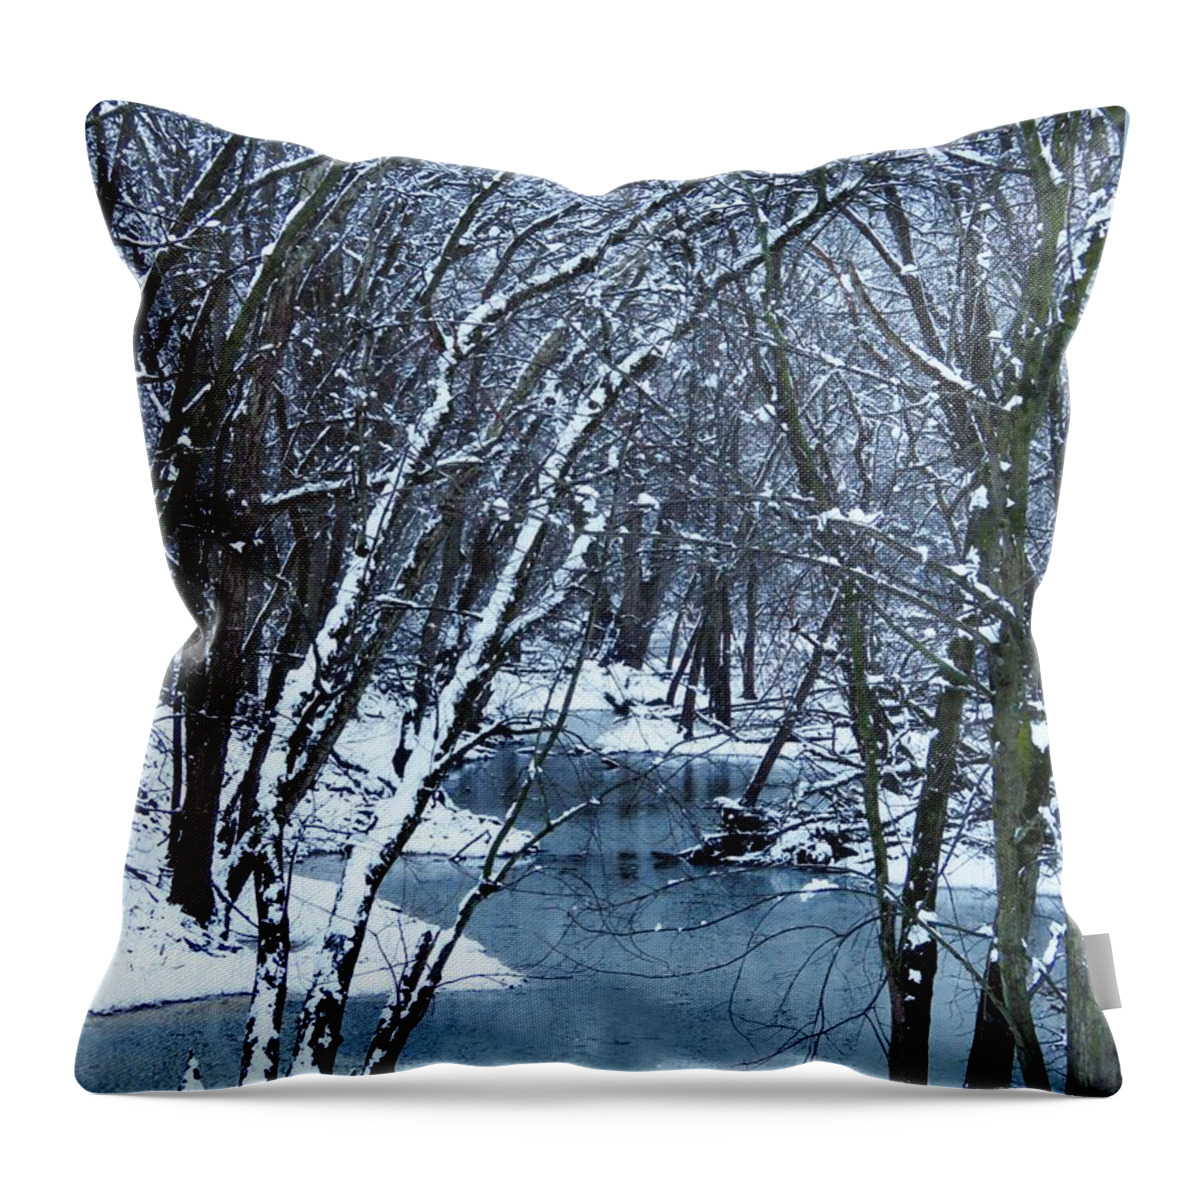 Stream Throw Pillow featuring the photograph The Winter Stream by Lori Frisch